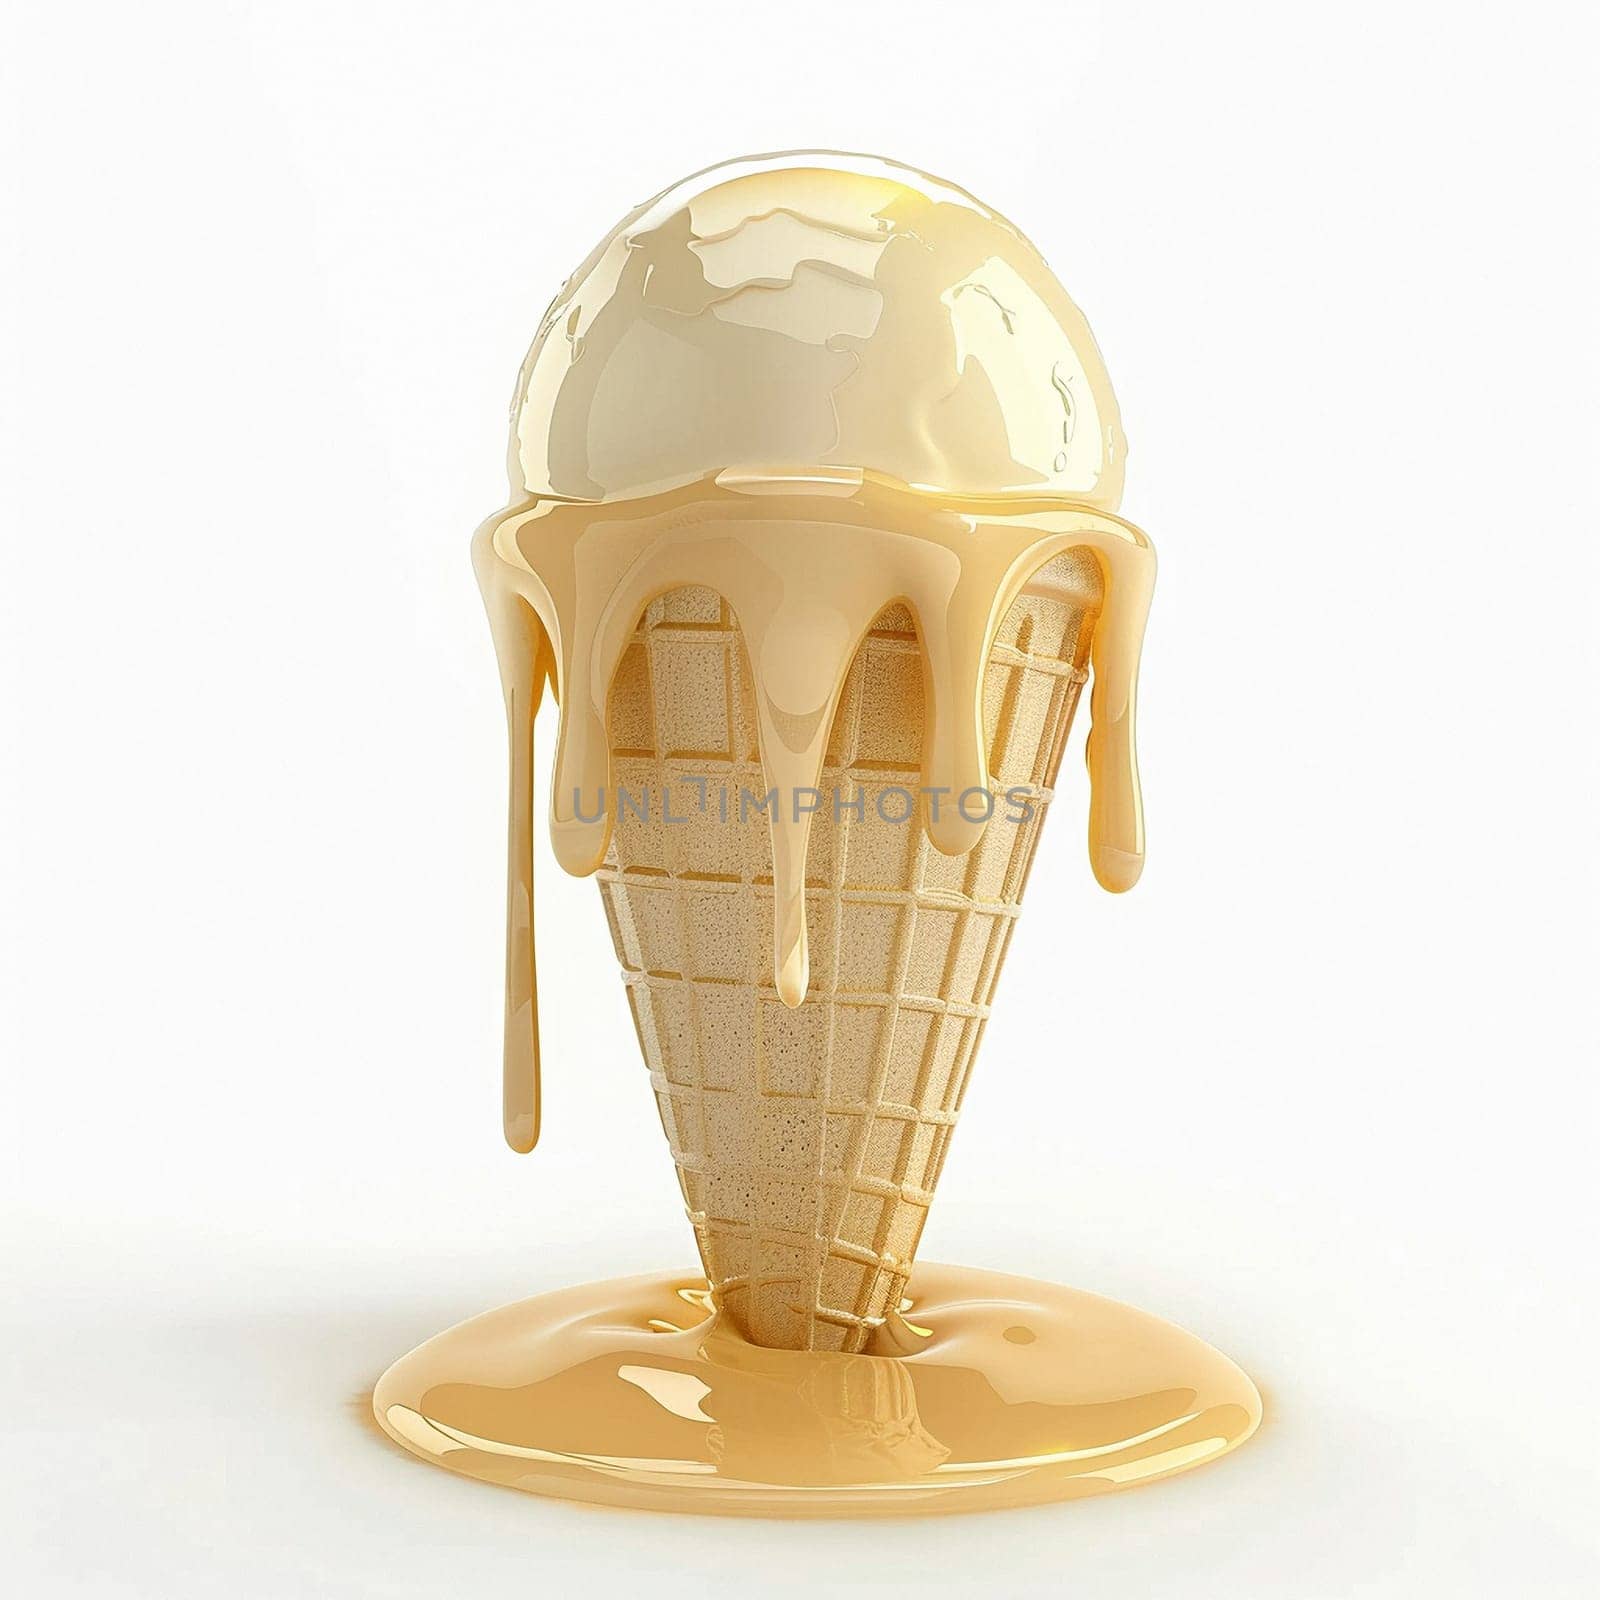 Melted 3d ice cream in a waffle cone. Syrup, crumbs, caramel by NeuroSky